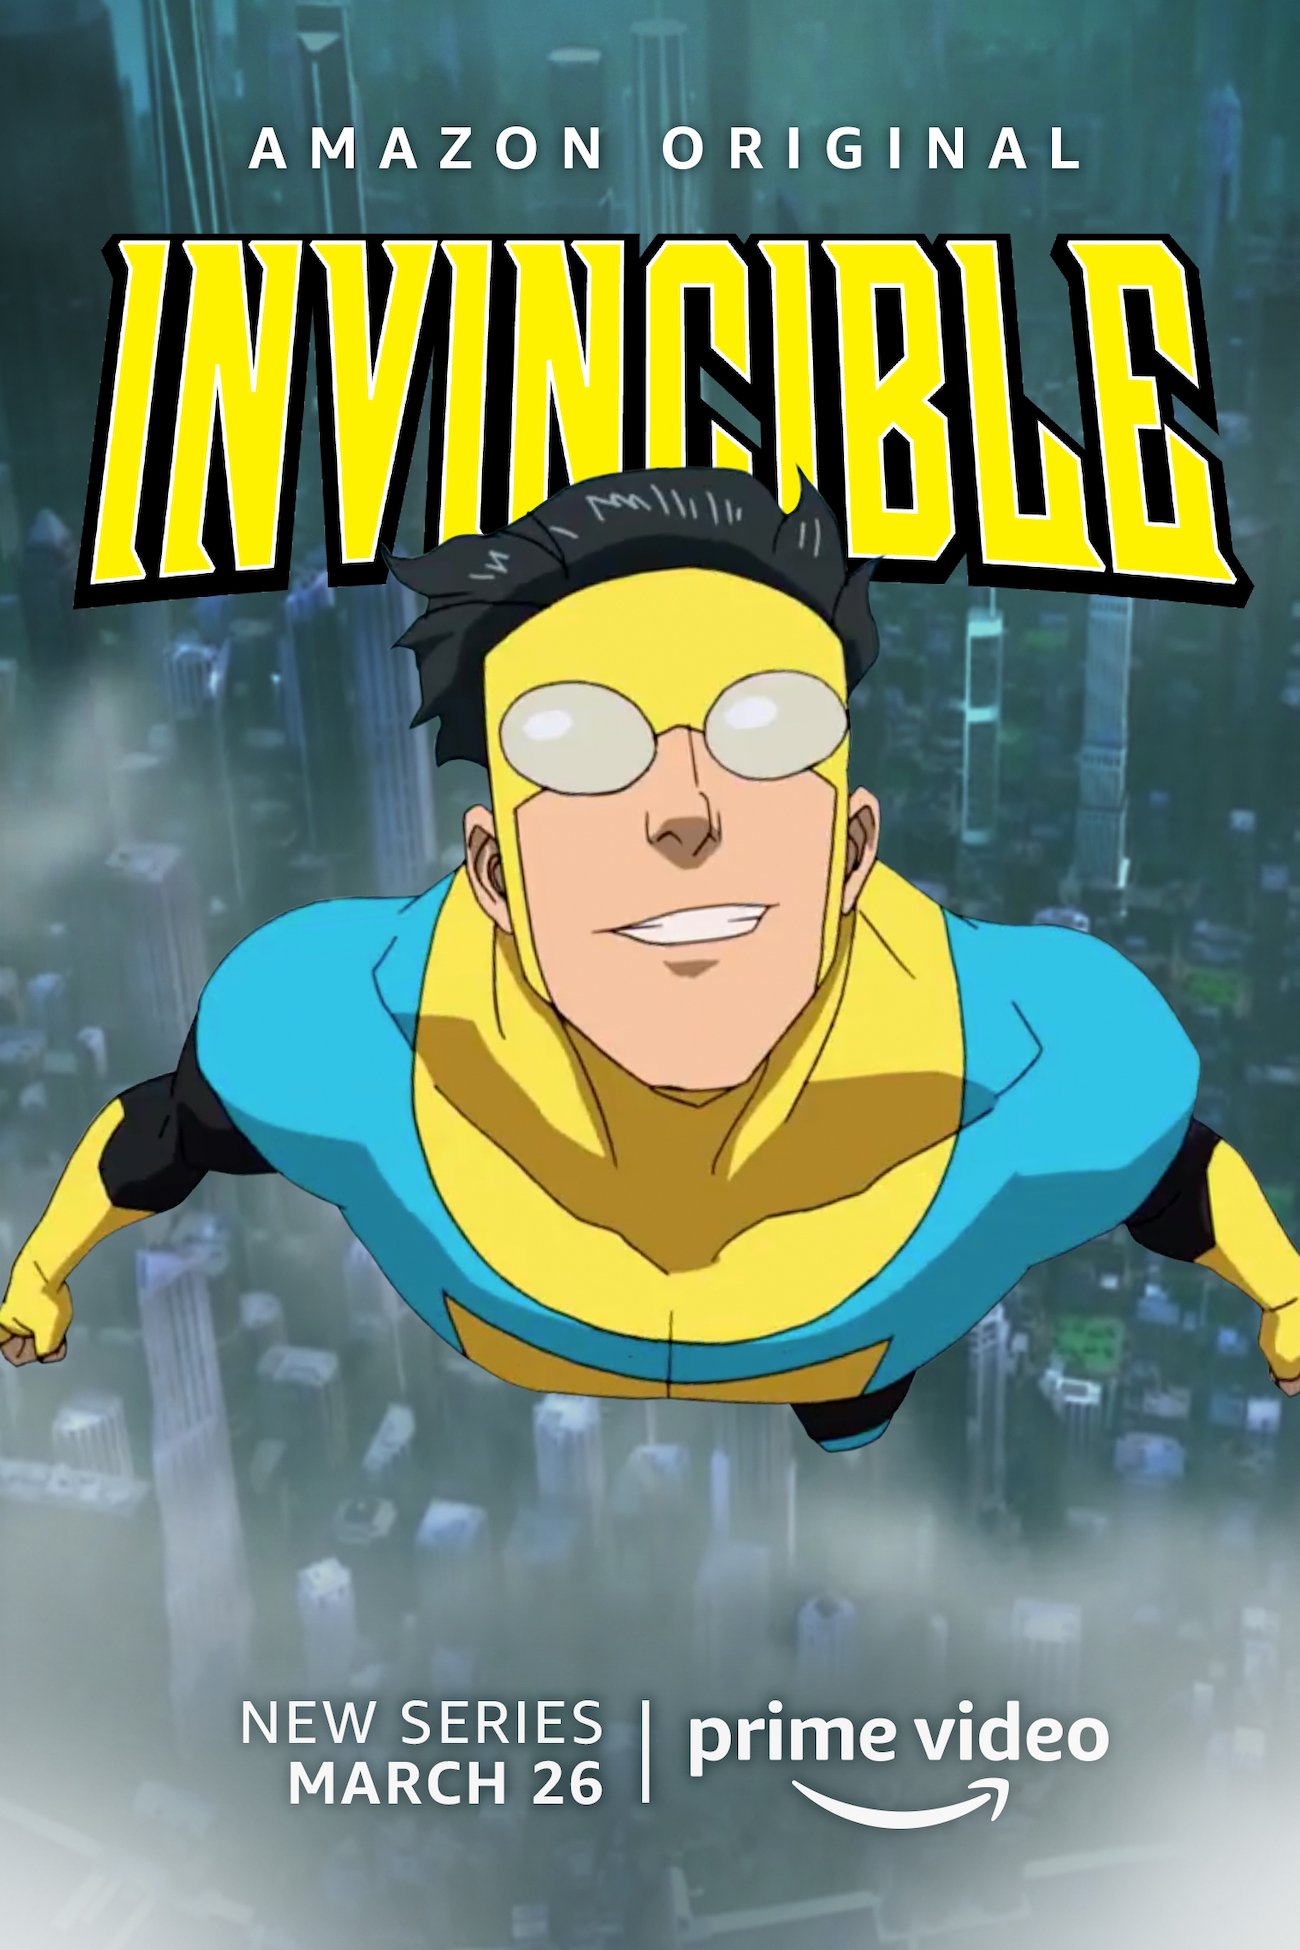 Amazon’s New Animated Series ‘Invincible’ Boasts Quite the Talented Voice Cast